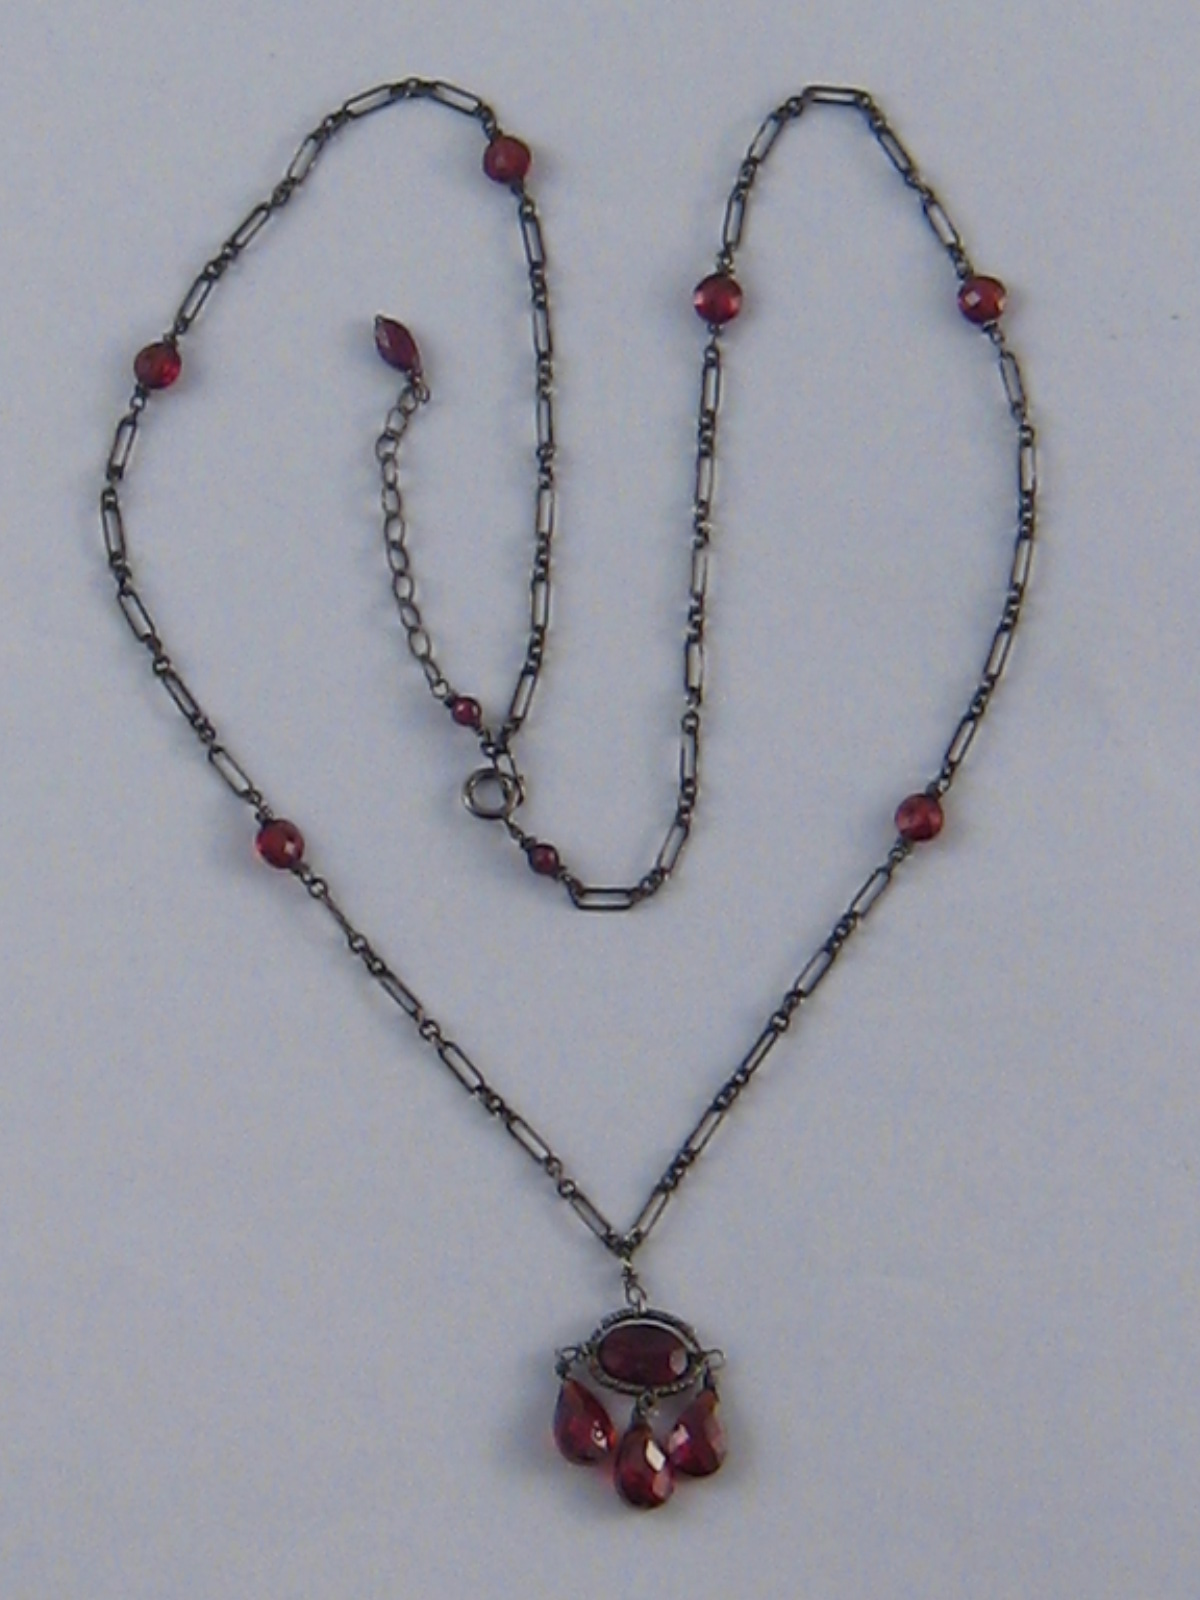 A silver and garnet necklace.